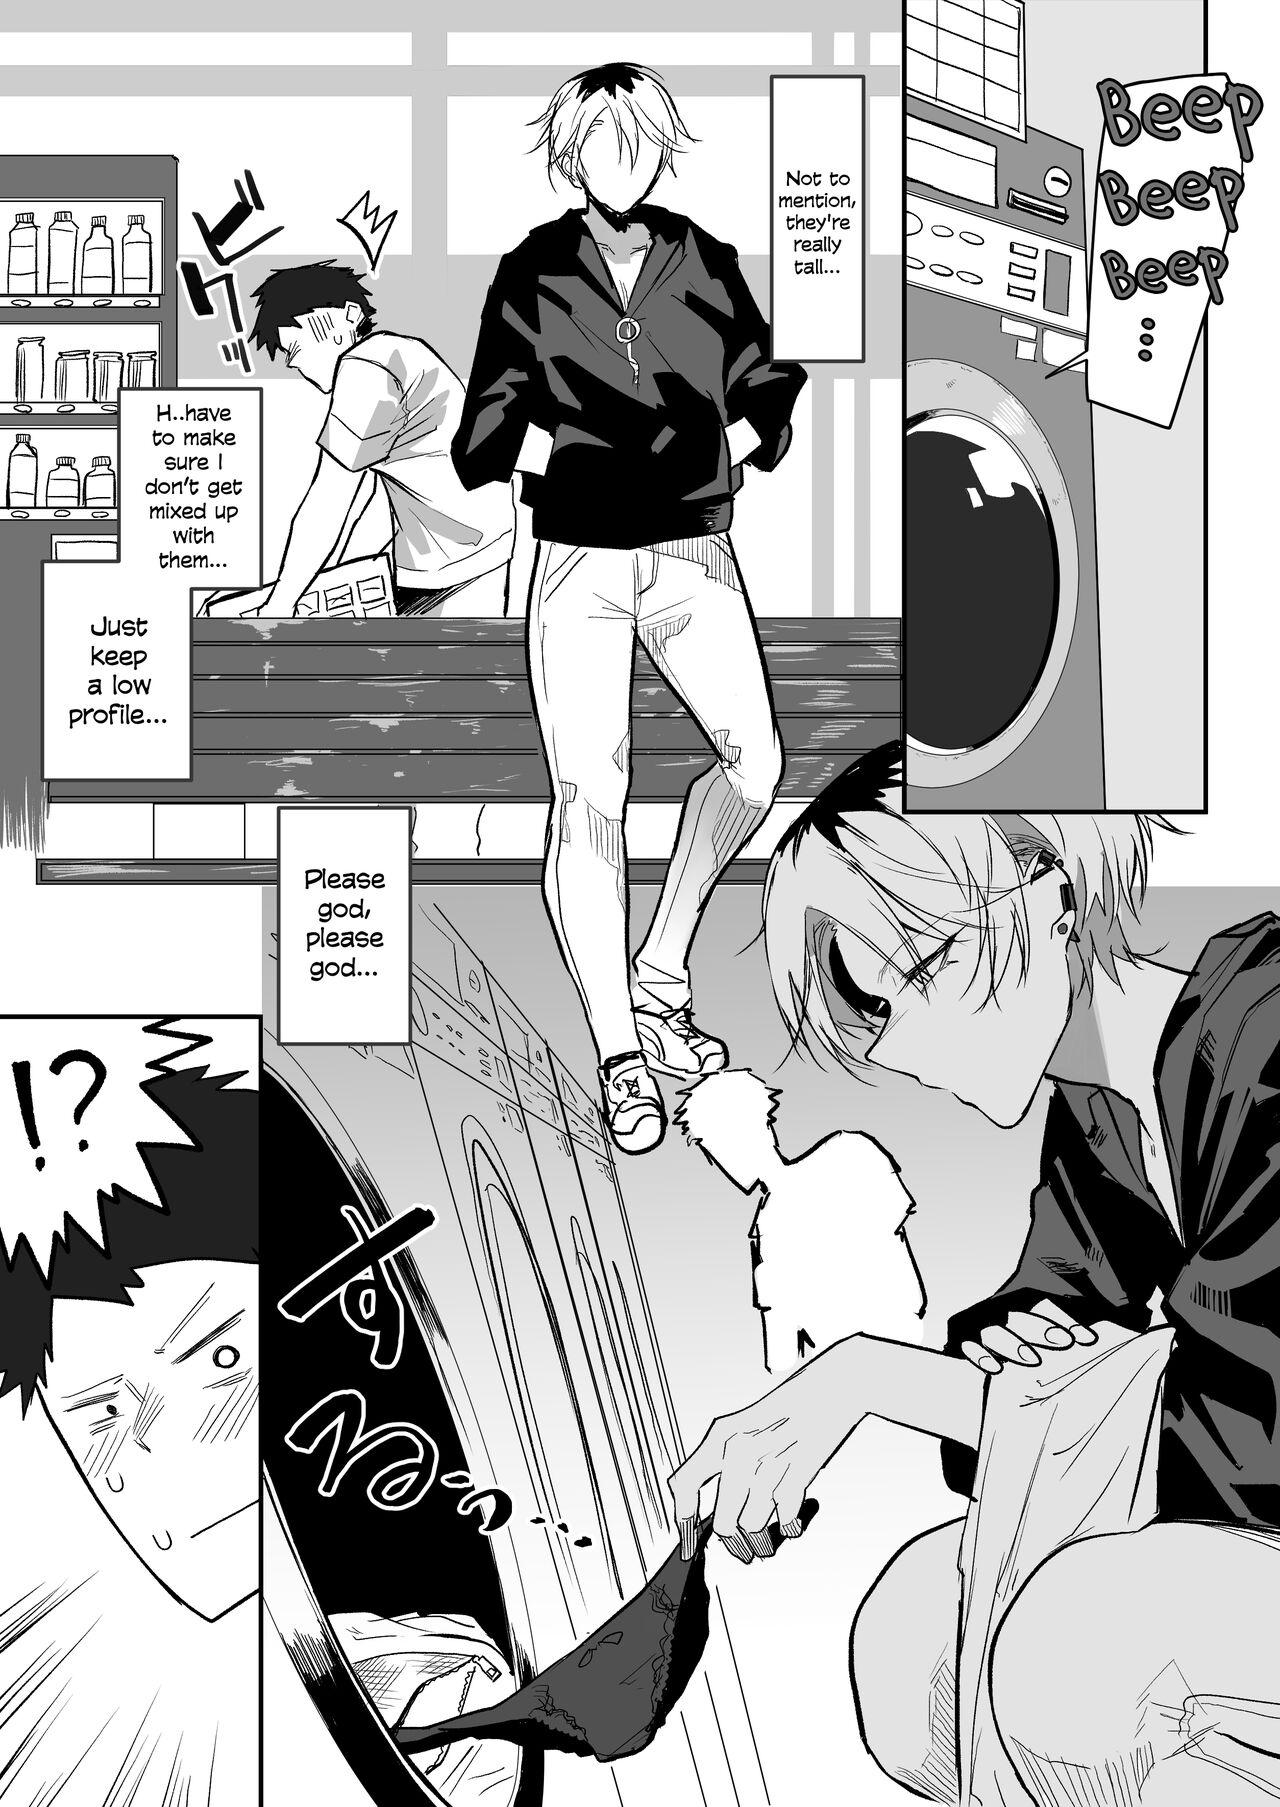 Erotic Coin Laundry de Kowai Yankee ni Karamareru Manga | A Manga About Getting Mixed Up With A Scary Delinquent At The Laundromat - Original Gorda - Picture 2